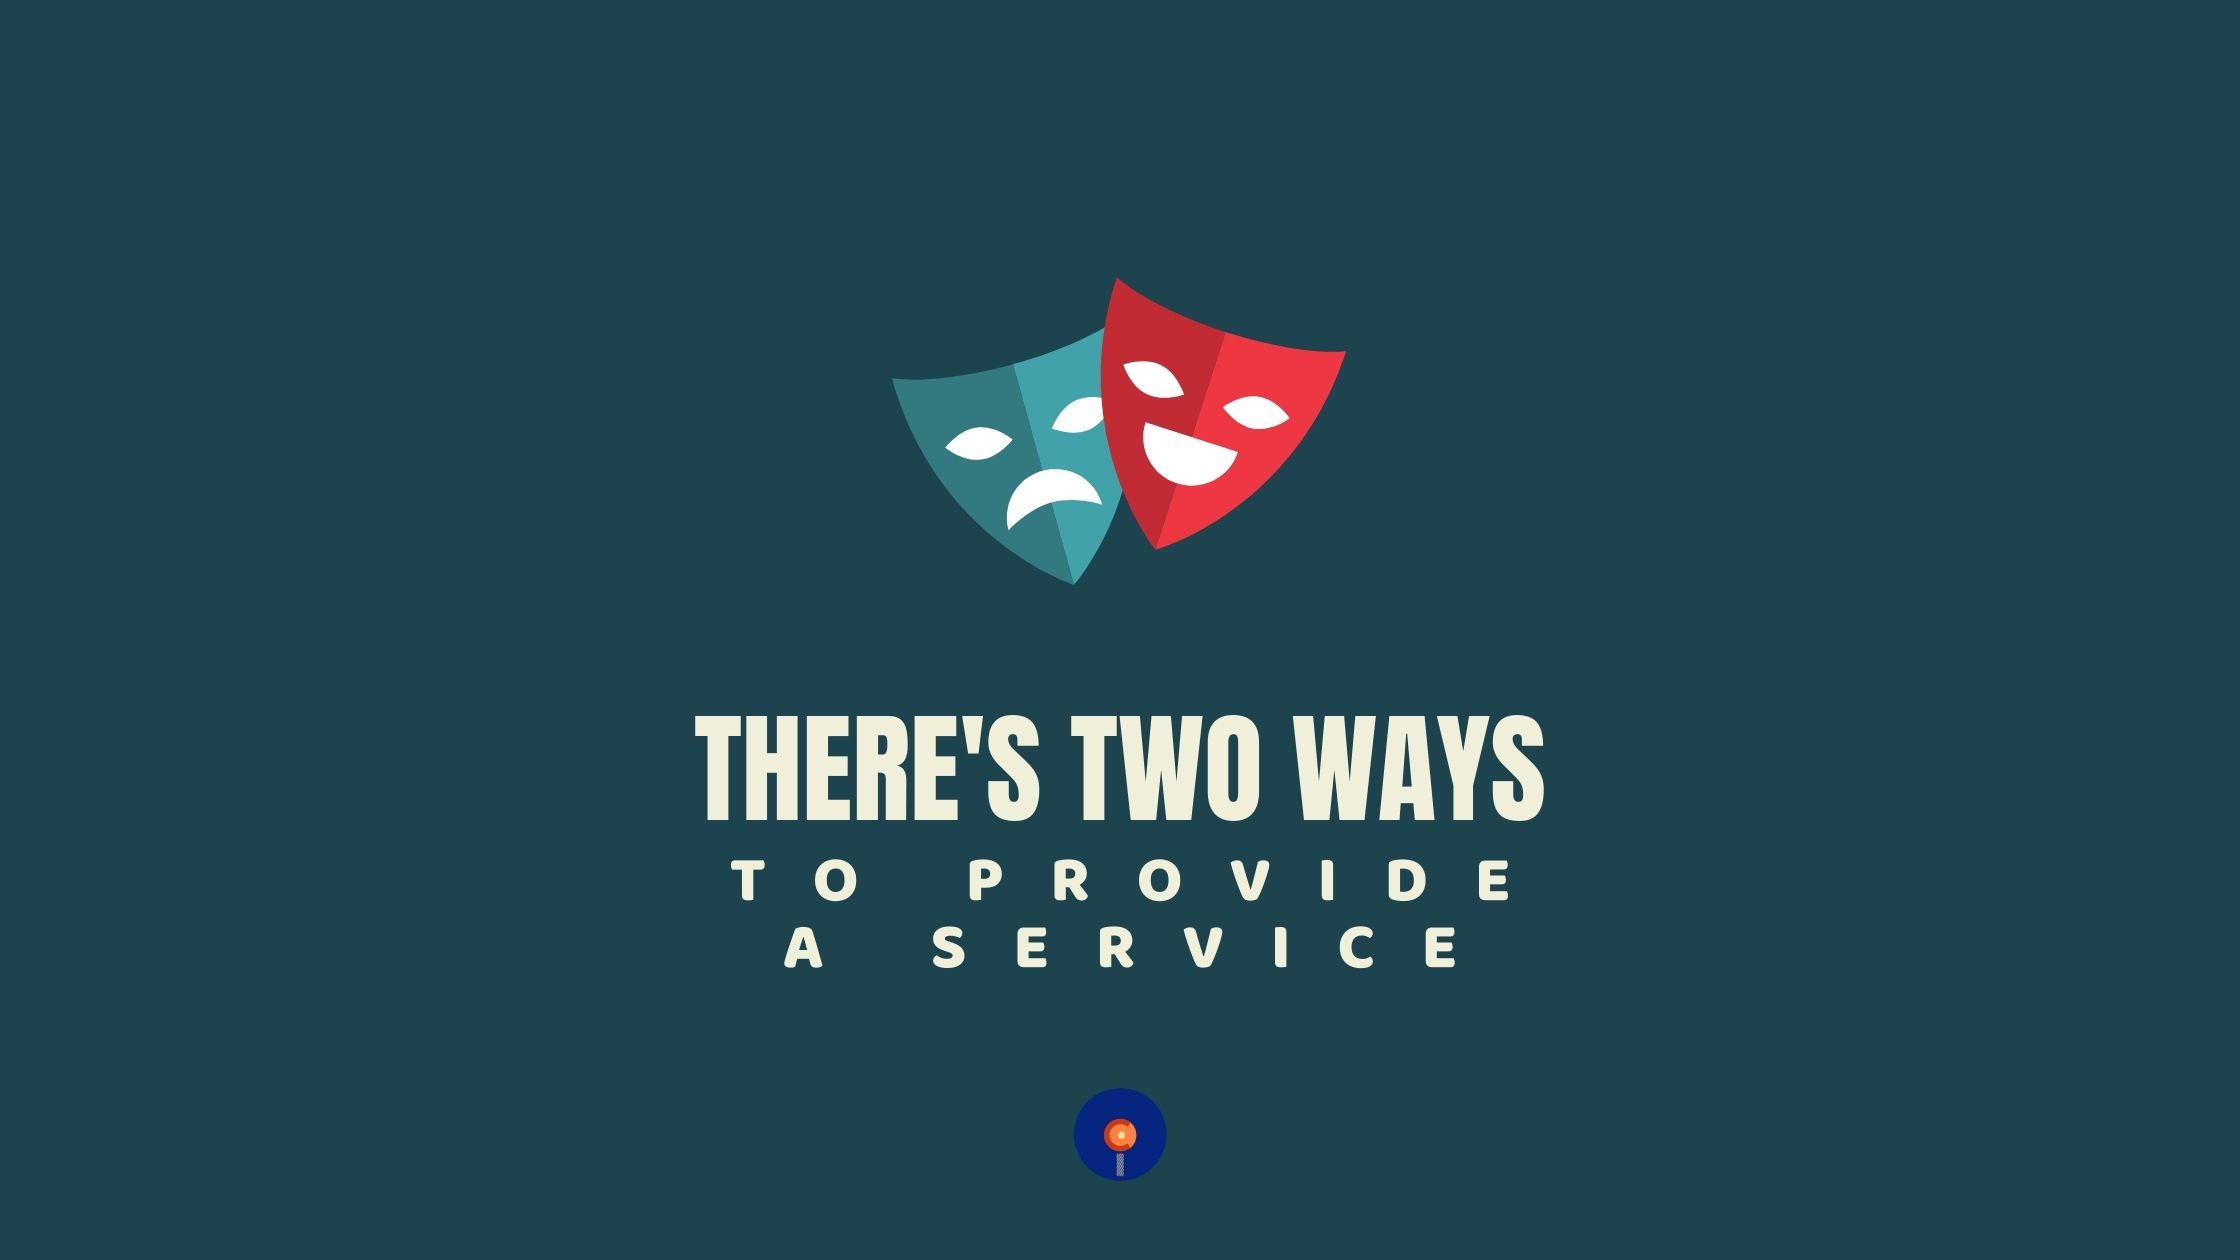 There’s two ways to provide a service